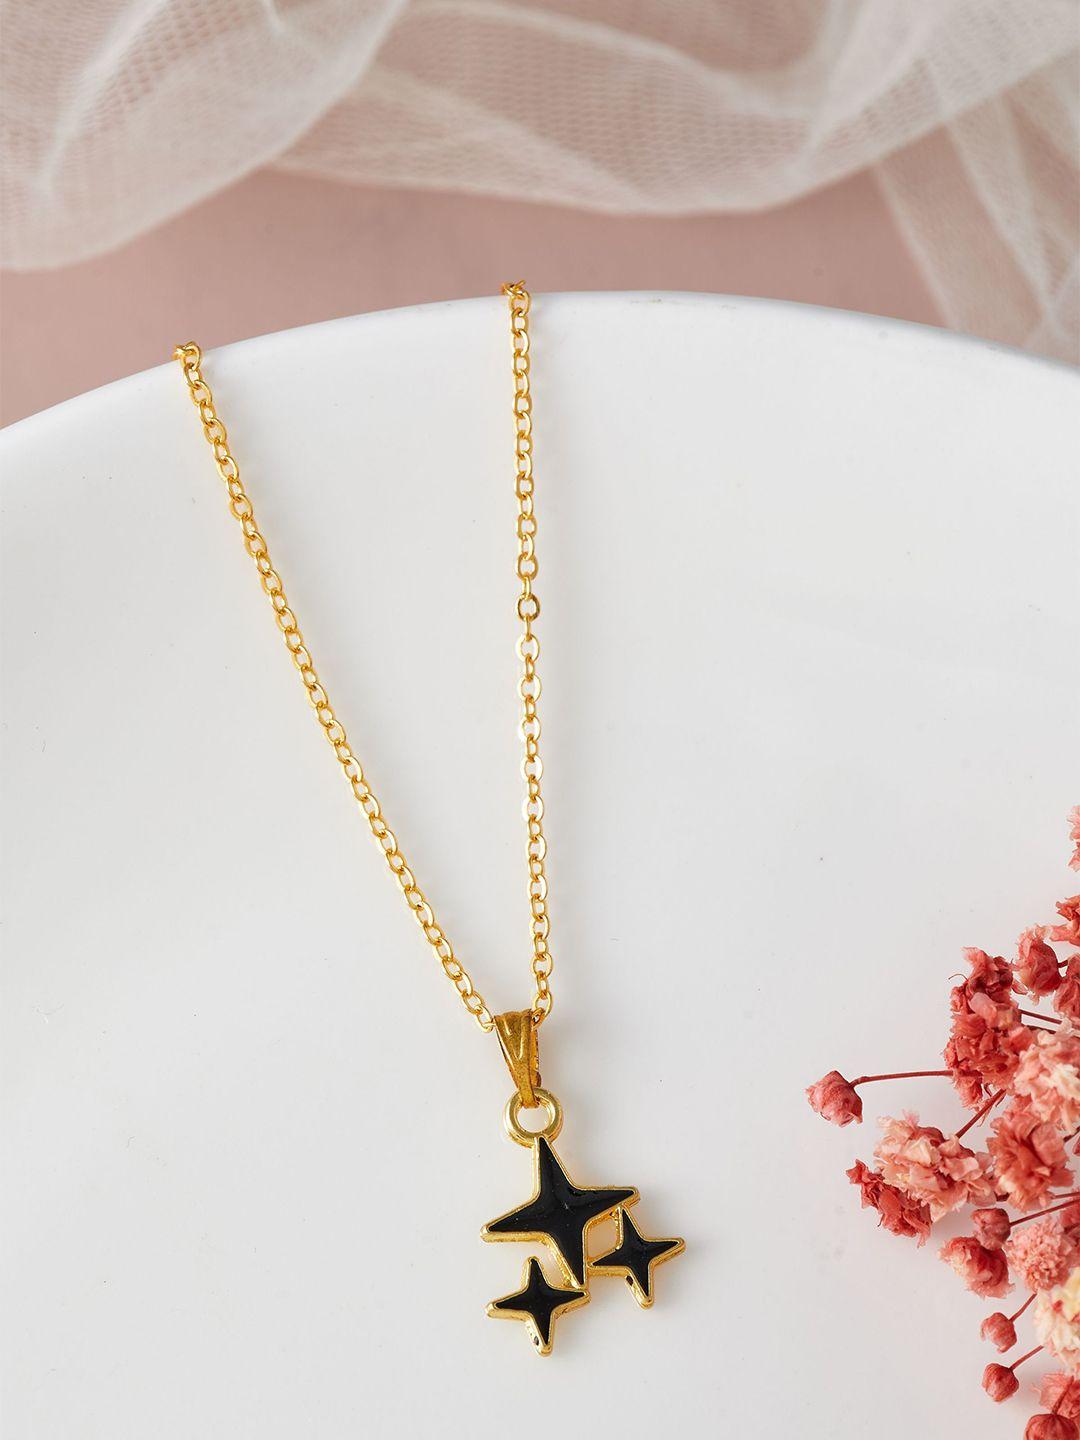 dressberry 3 star shape enamelled pendant with chain